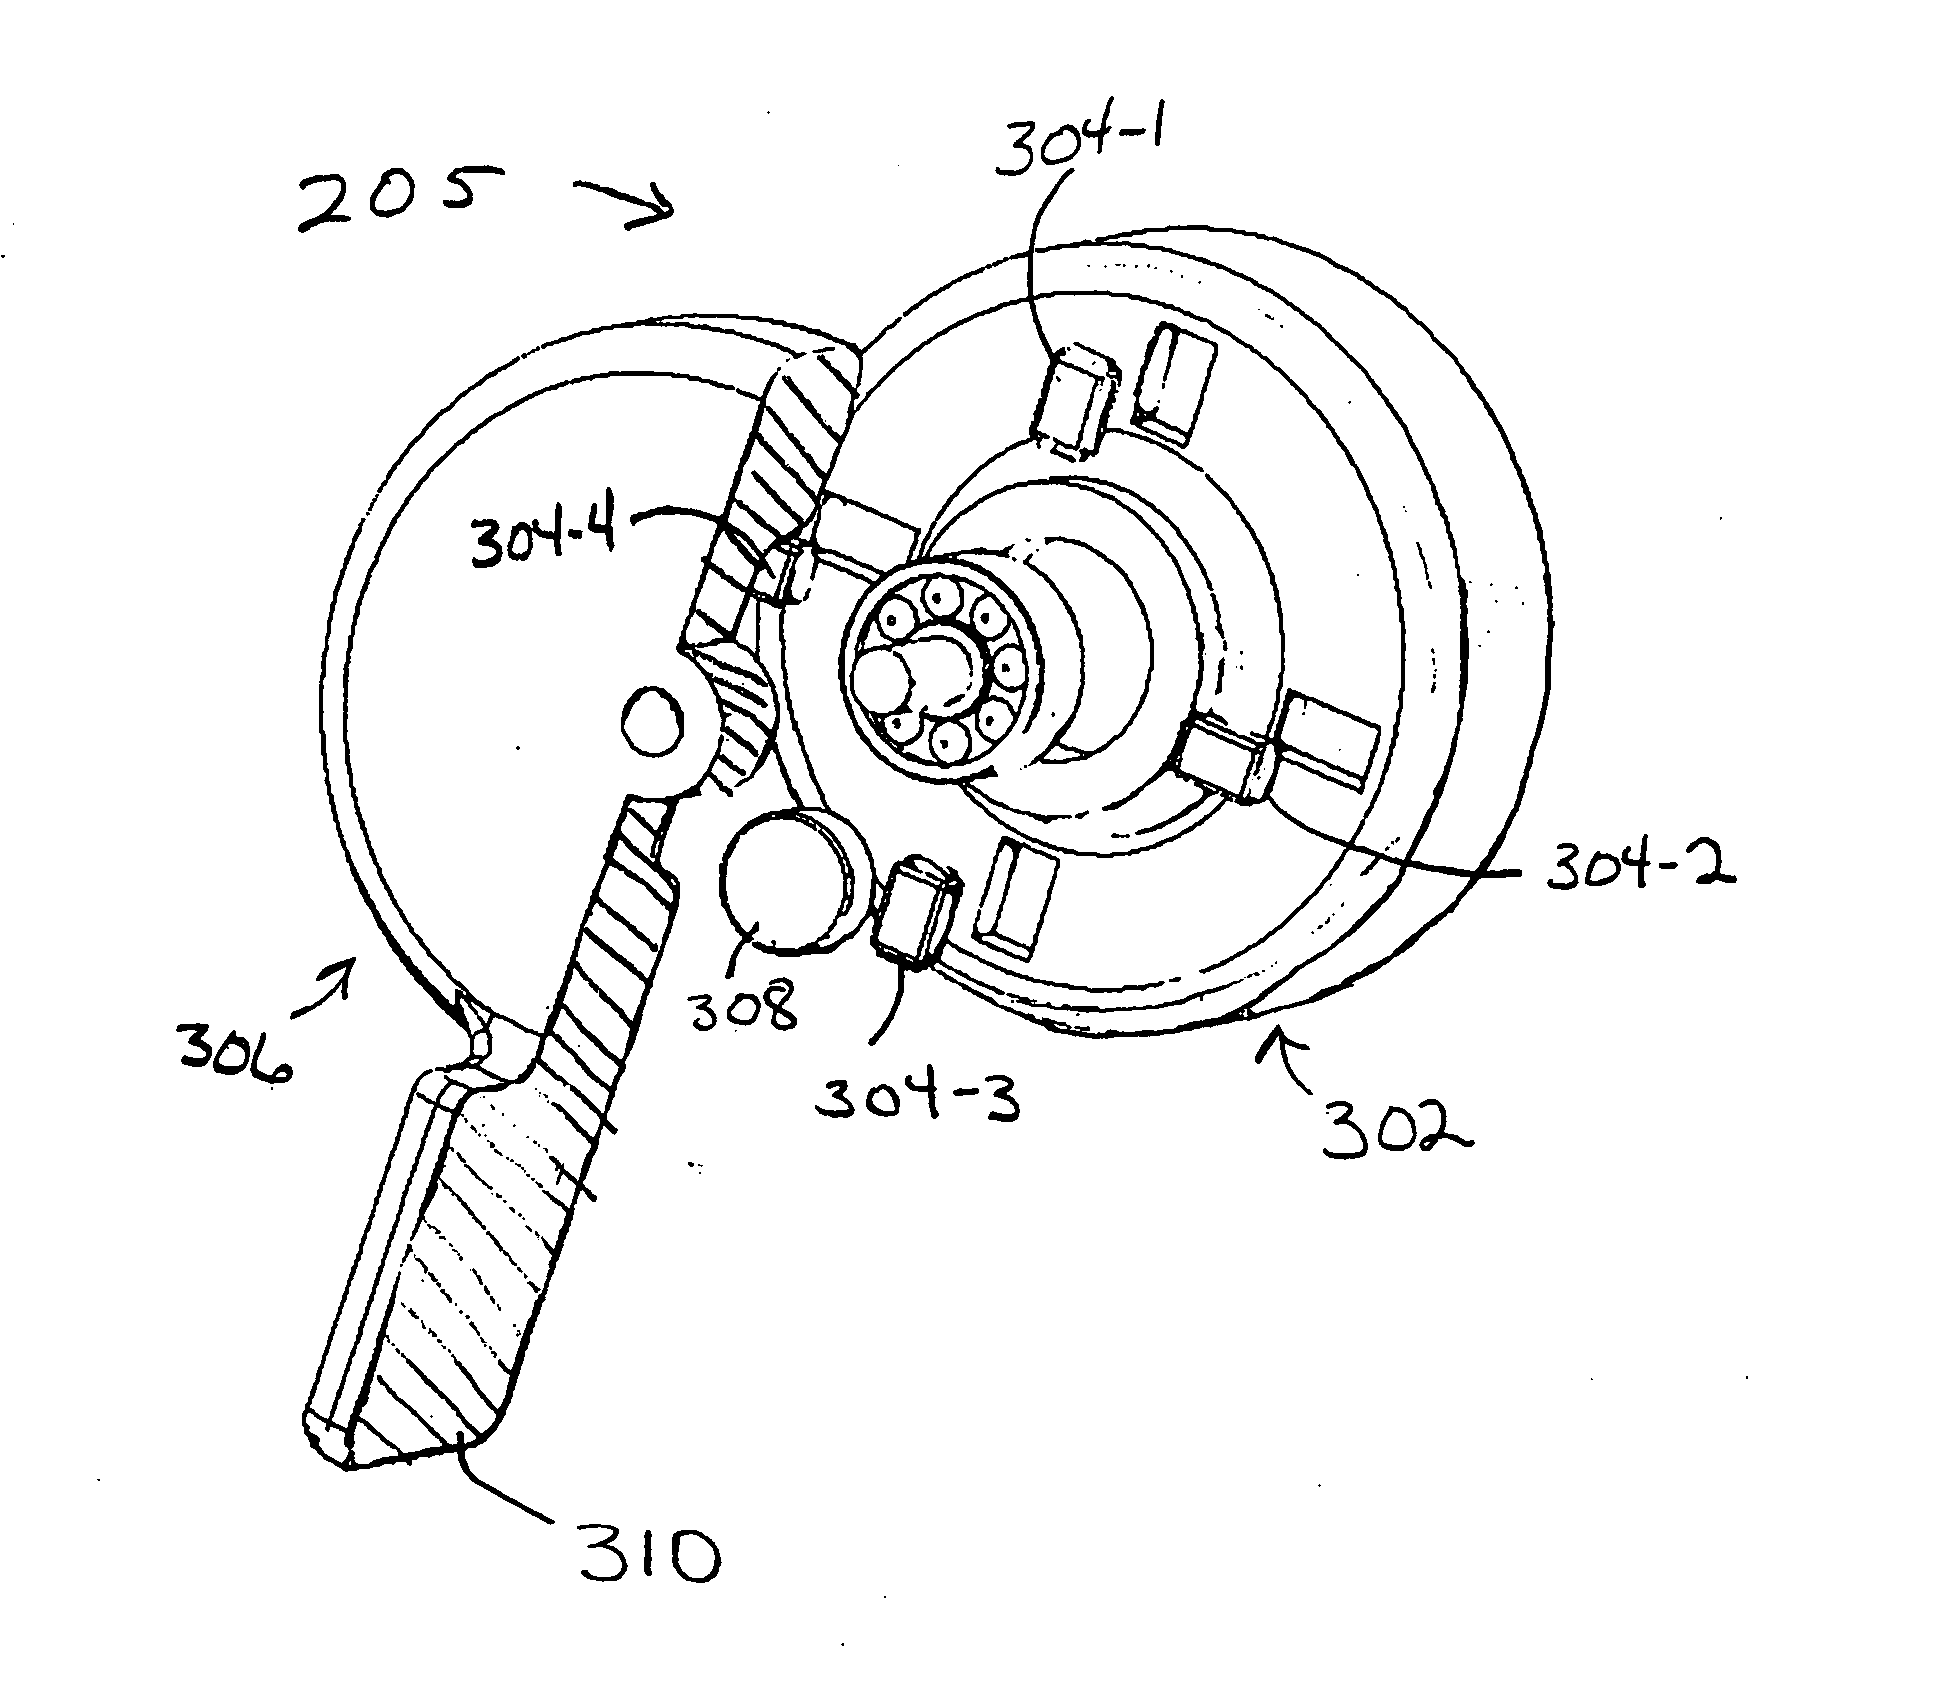 Power transmission monitoring and maintenance systems and methods